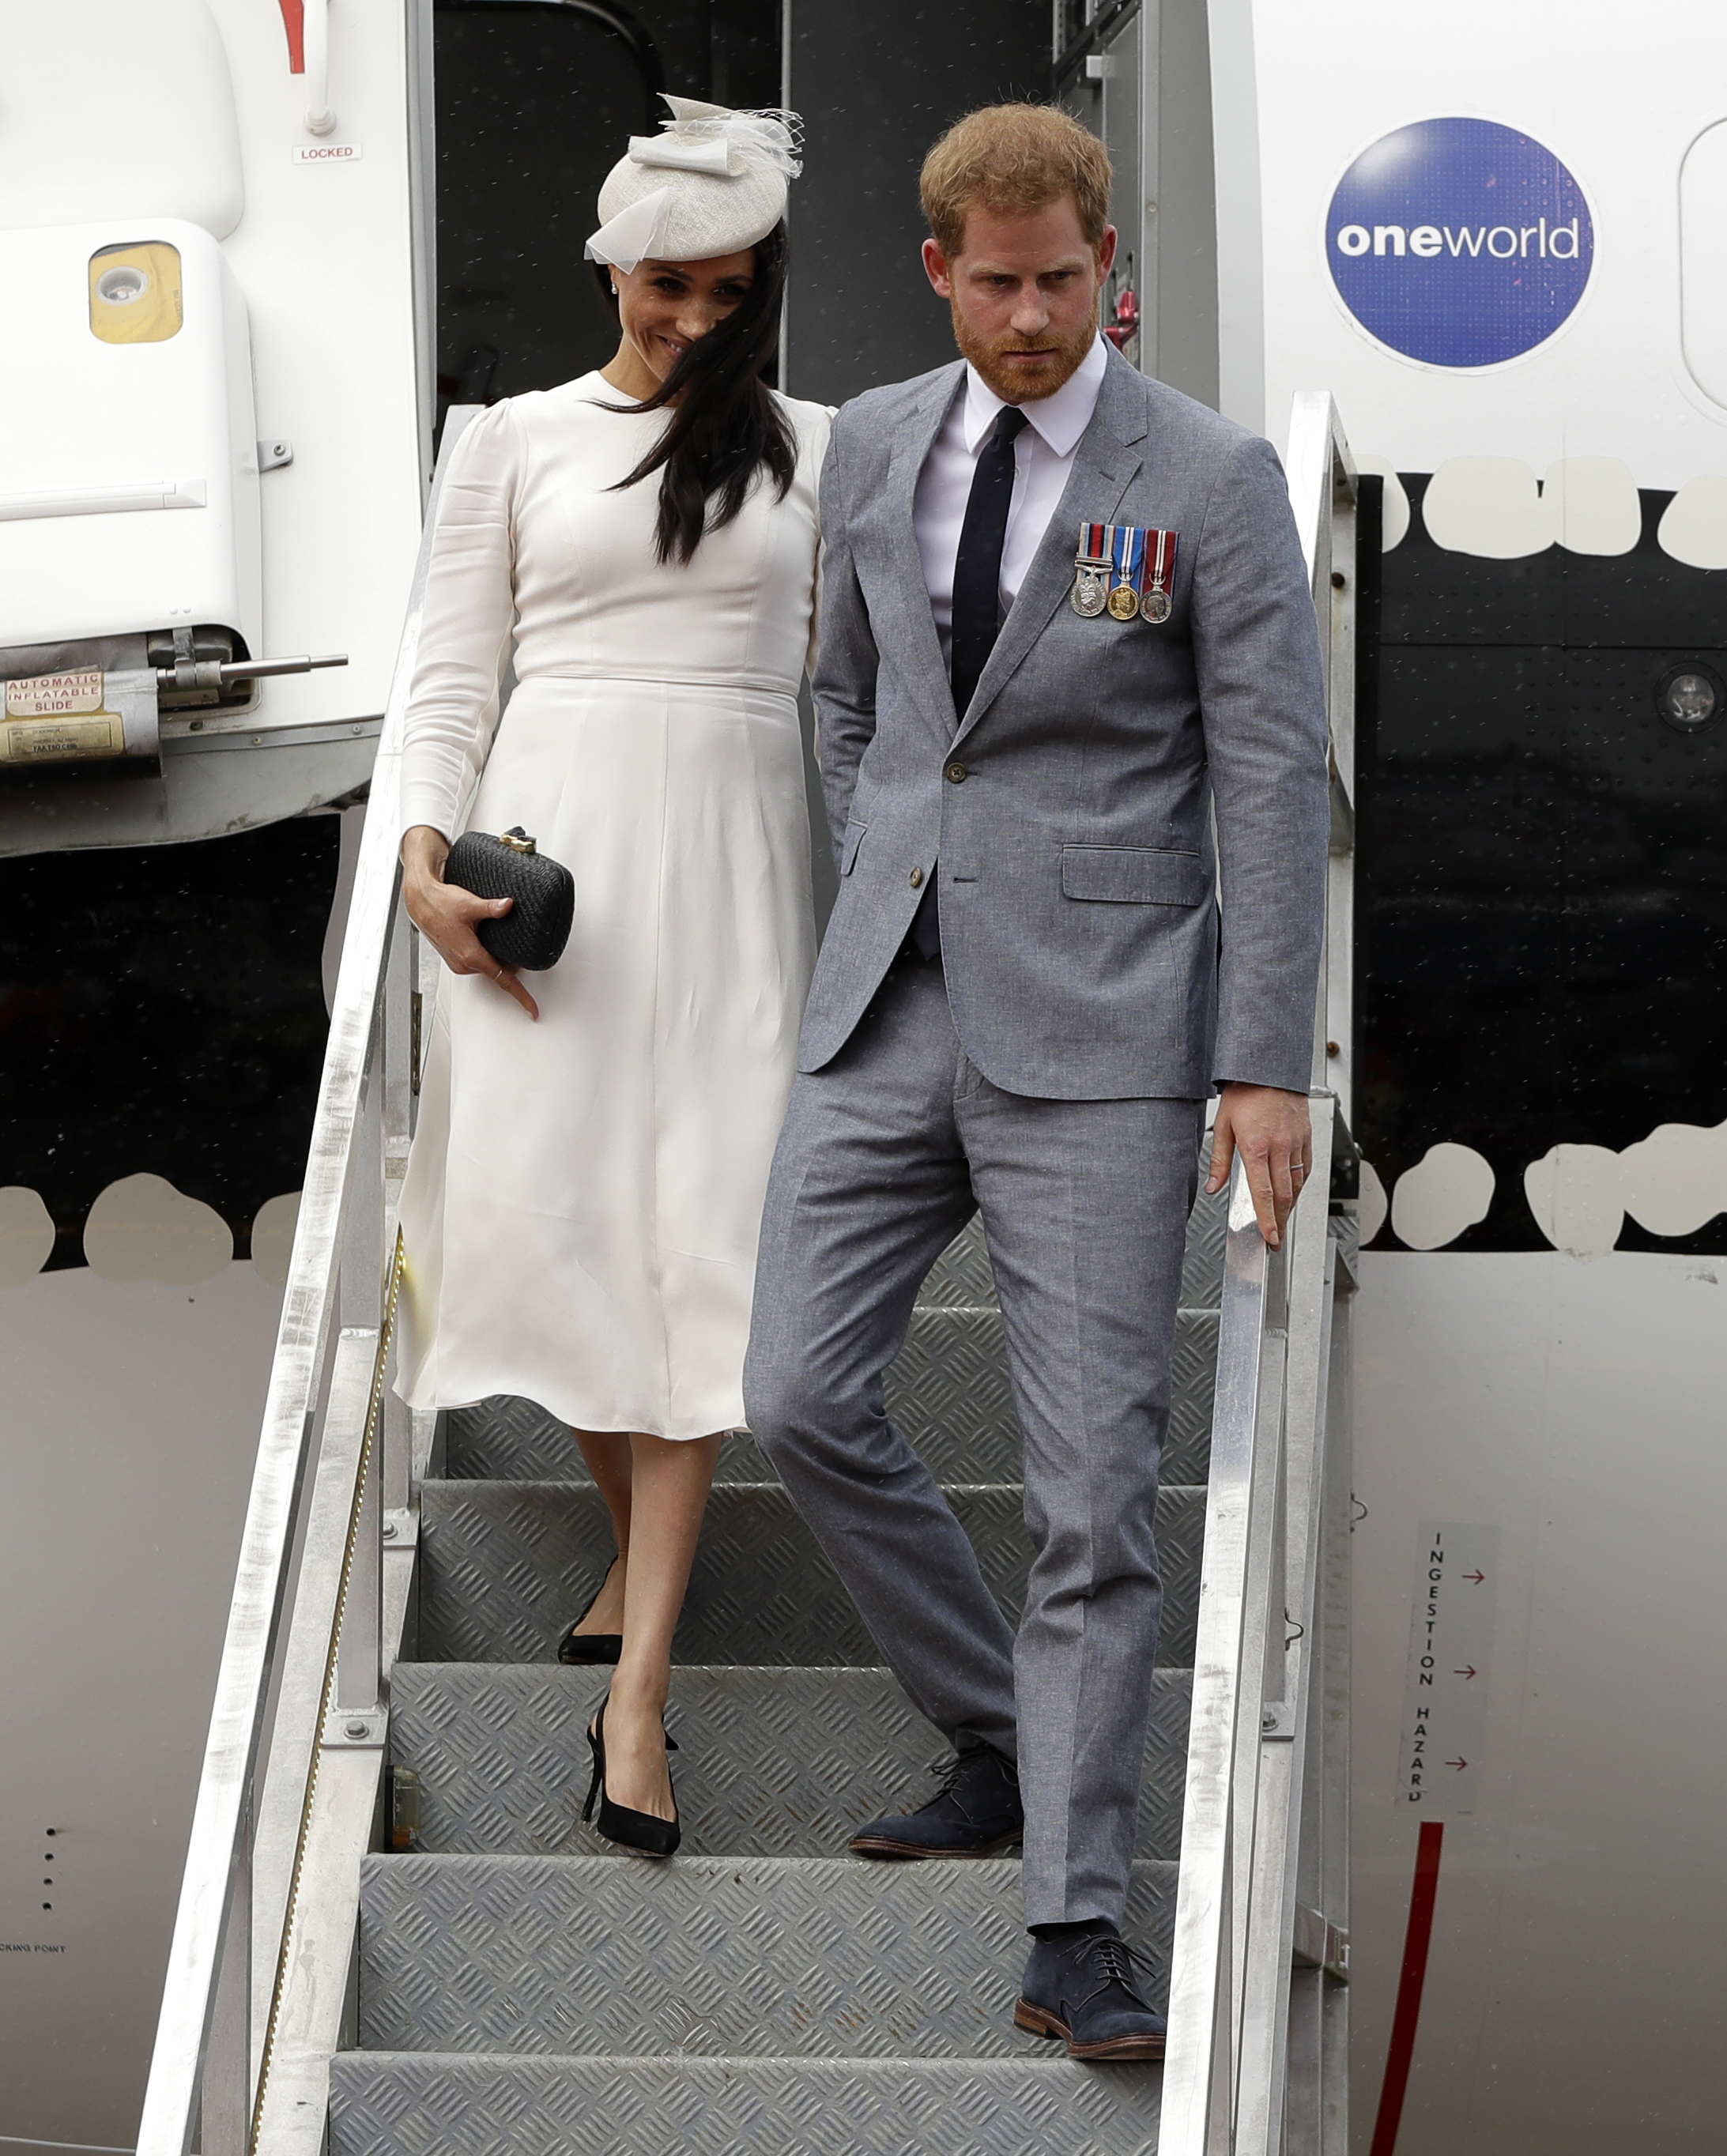 Meghan Markle and Prince Harry disembark from their plane on their arrival in Suva on October 23, 2018 in Suva, Fiji | Source: Getty Images